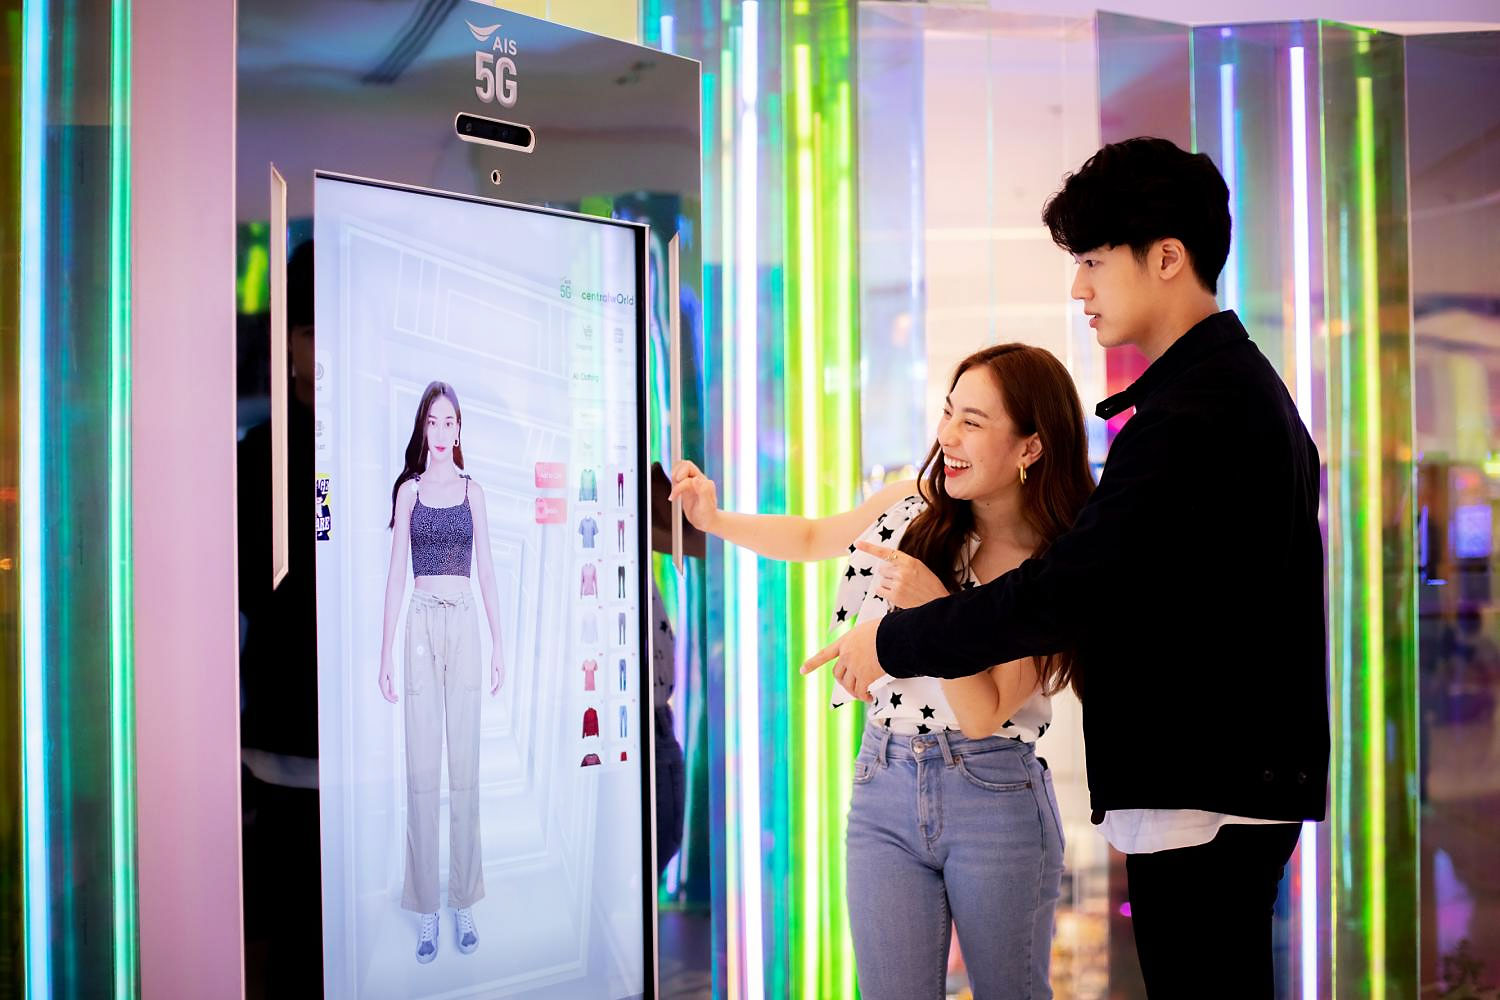 Consumers interact with a digital fitting room